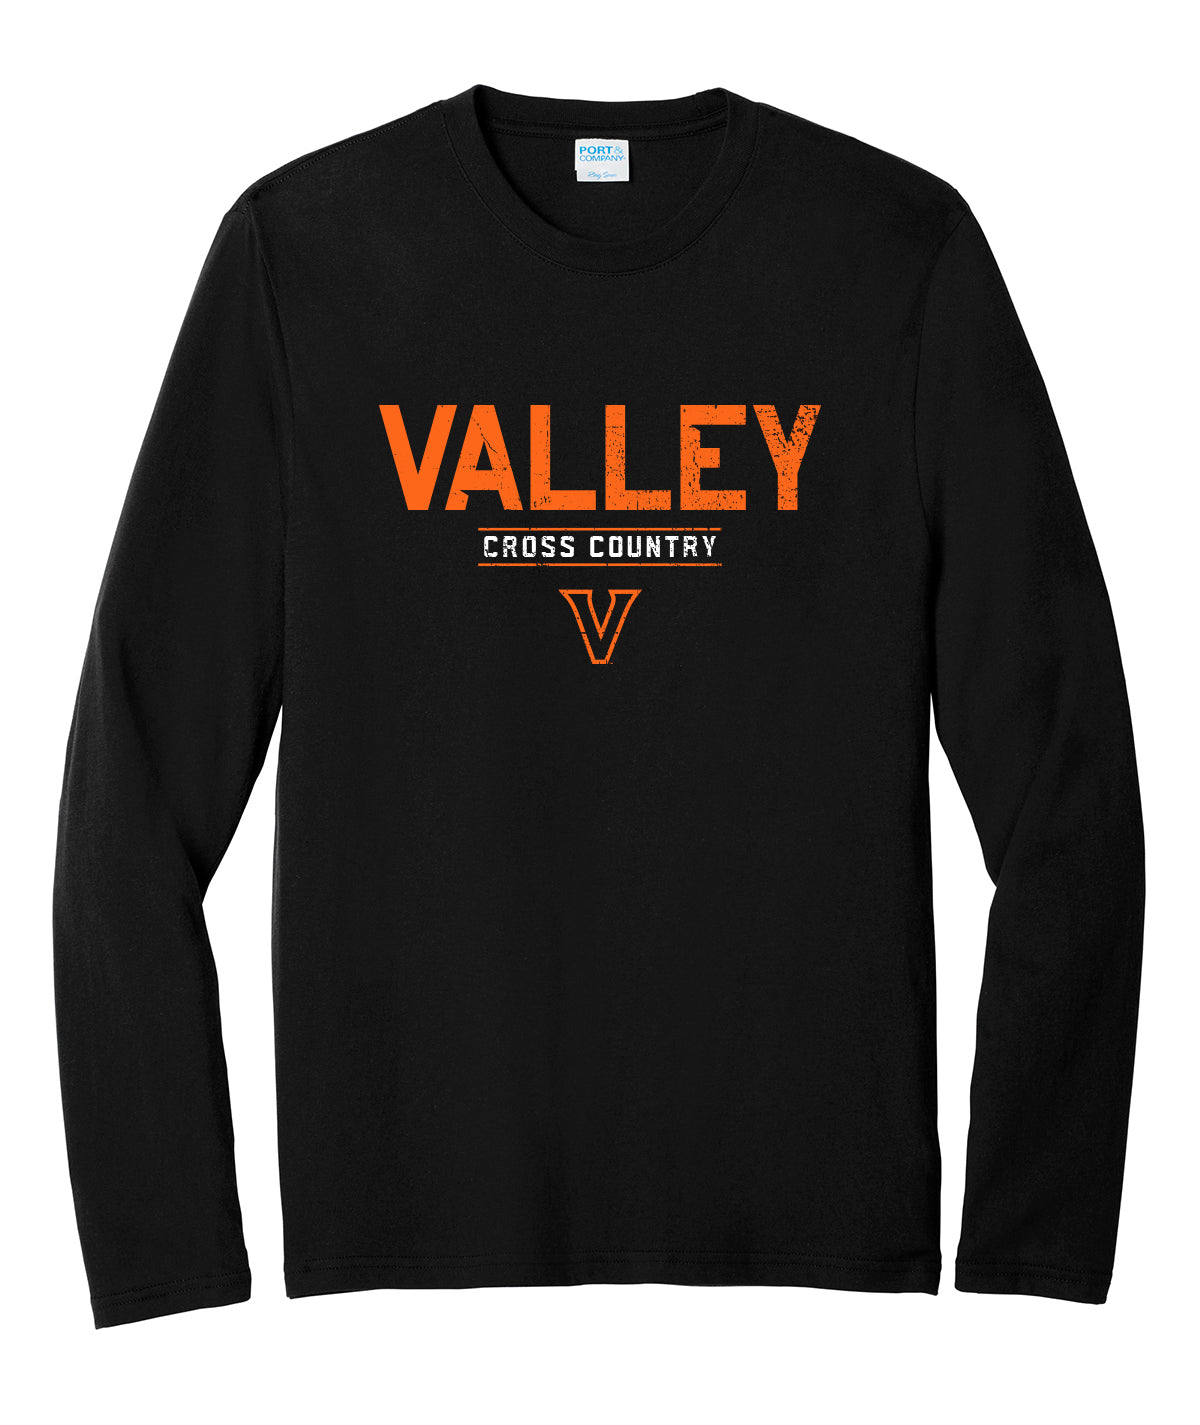 Valley Cross Country Long-Sleeve Tee